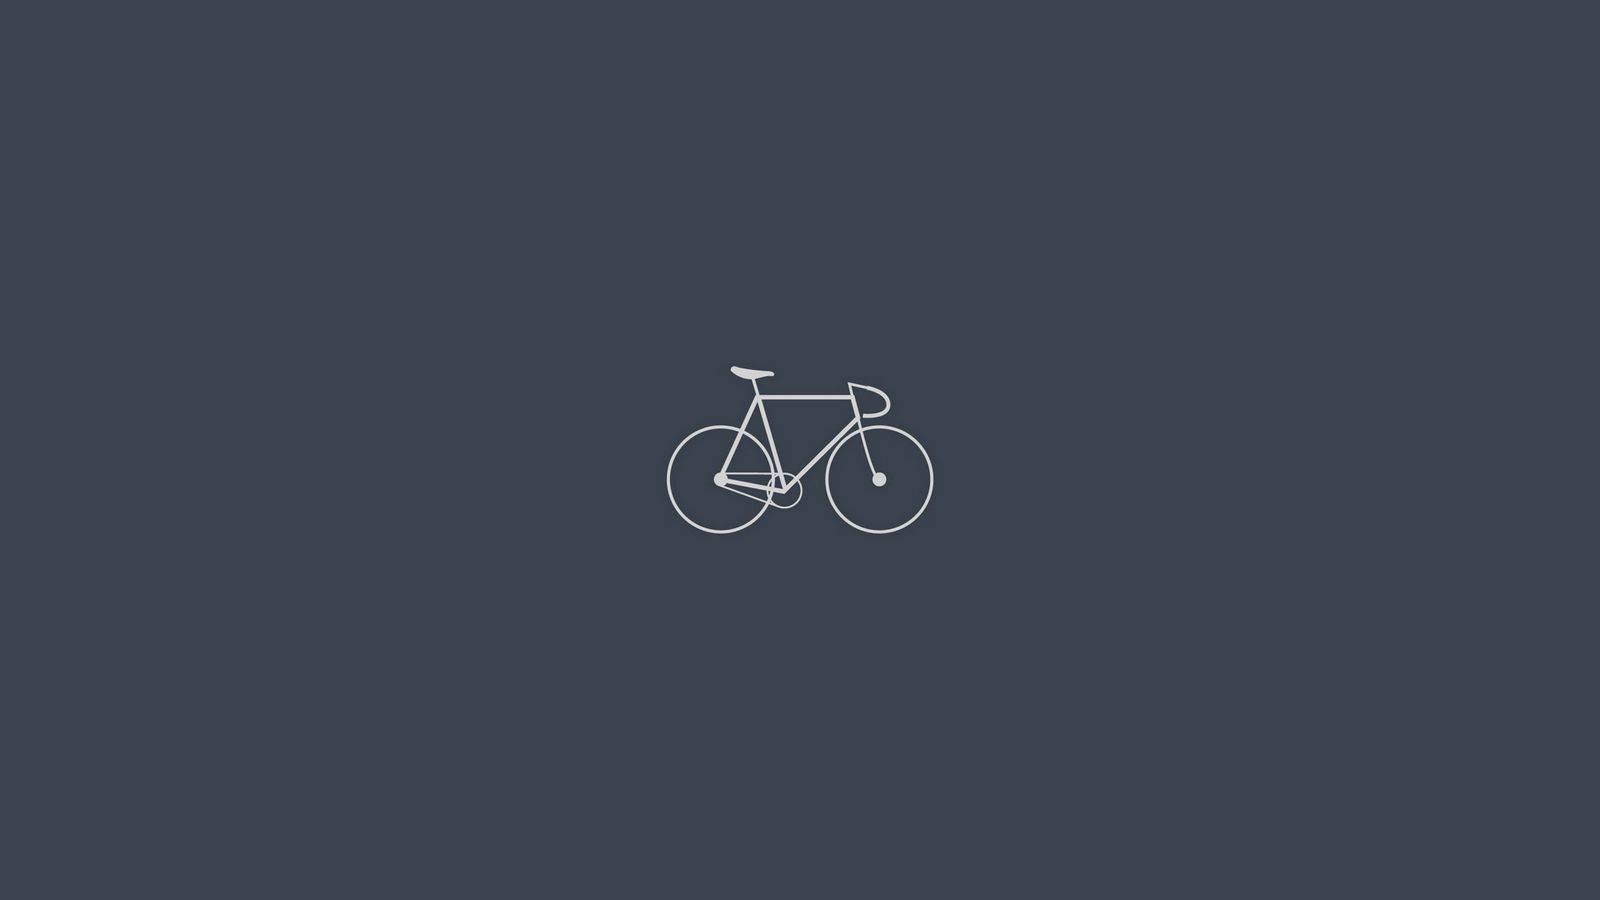 Download wallpaper 1600x900 bicycle, minimalism, gray widescreen 16:9 HD background